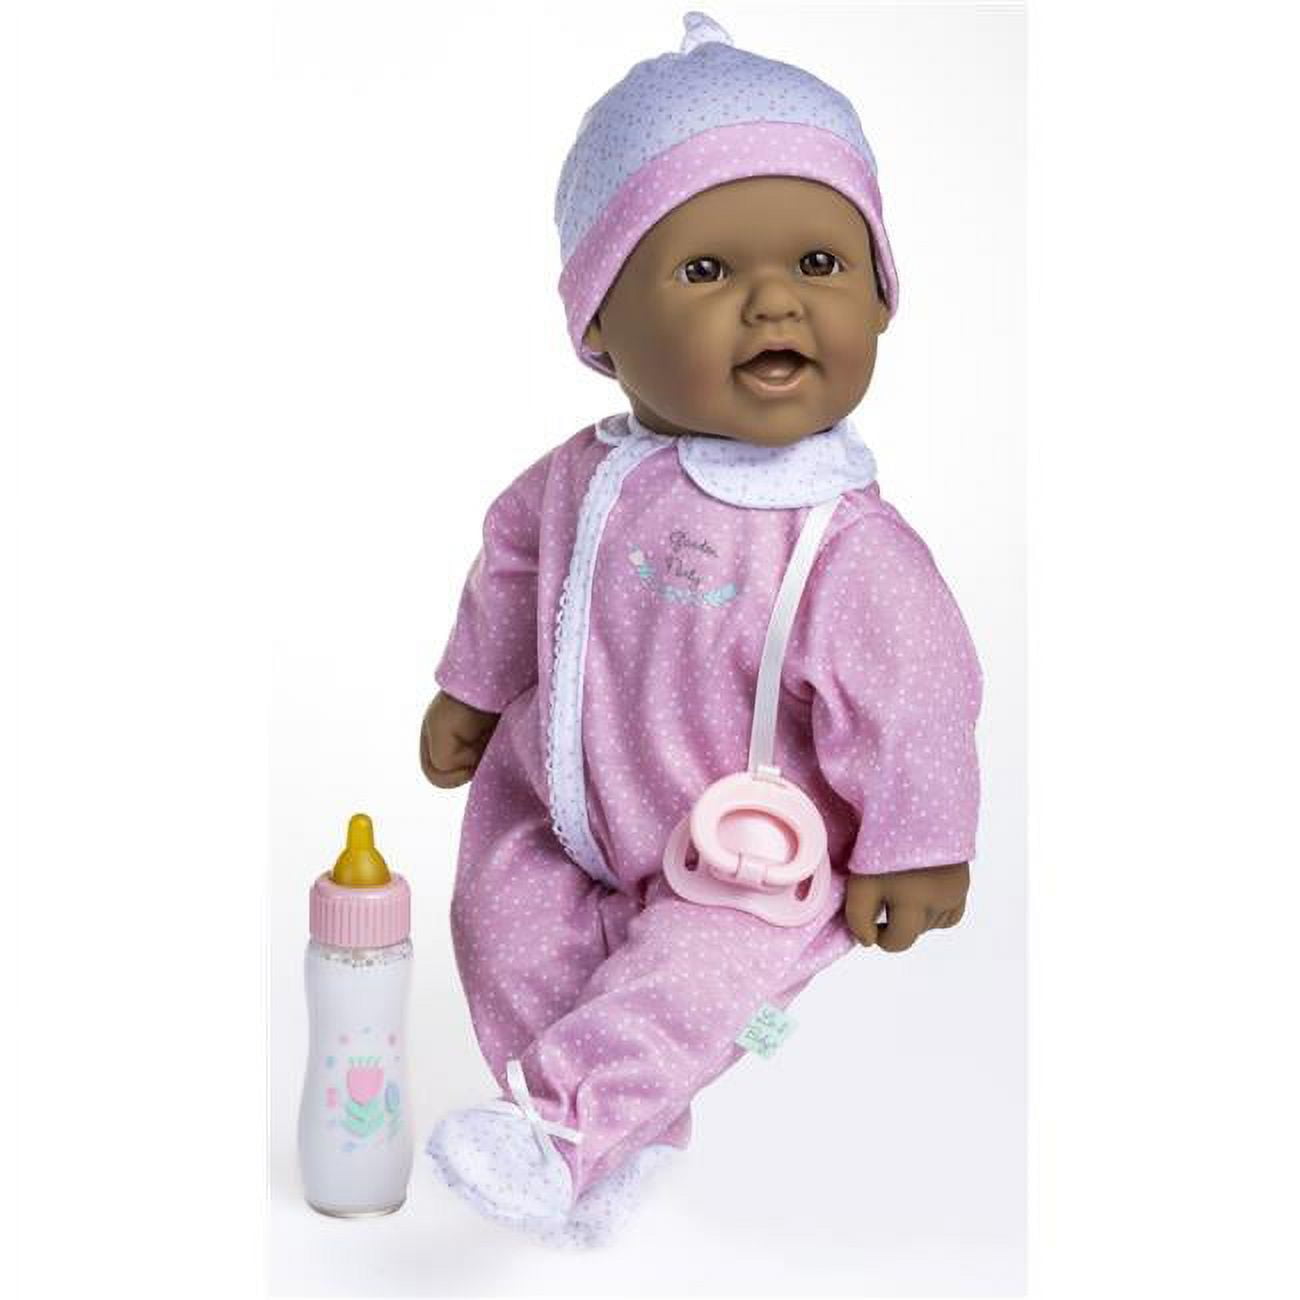 JC Toys Group 15037 16 in. La Baby Soft Body Baby Doll with